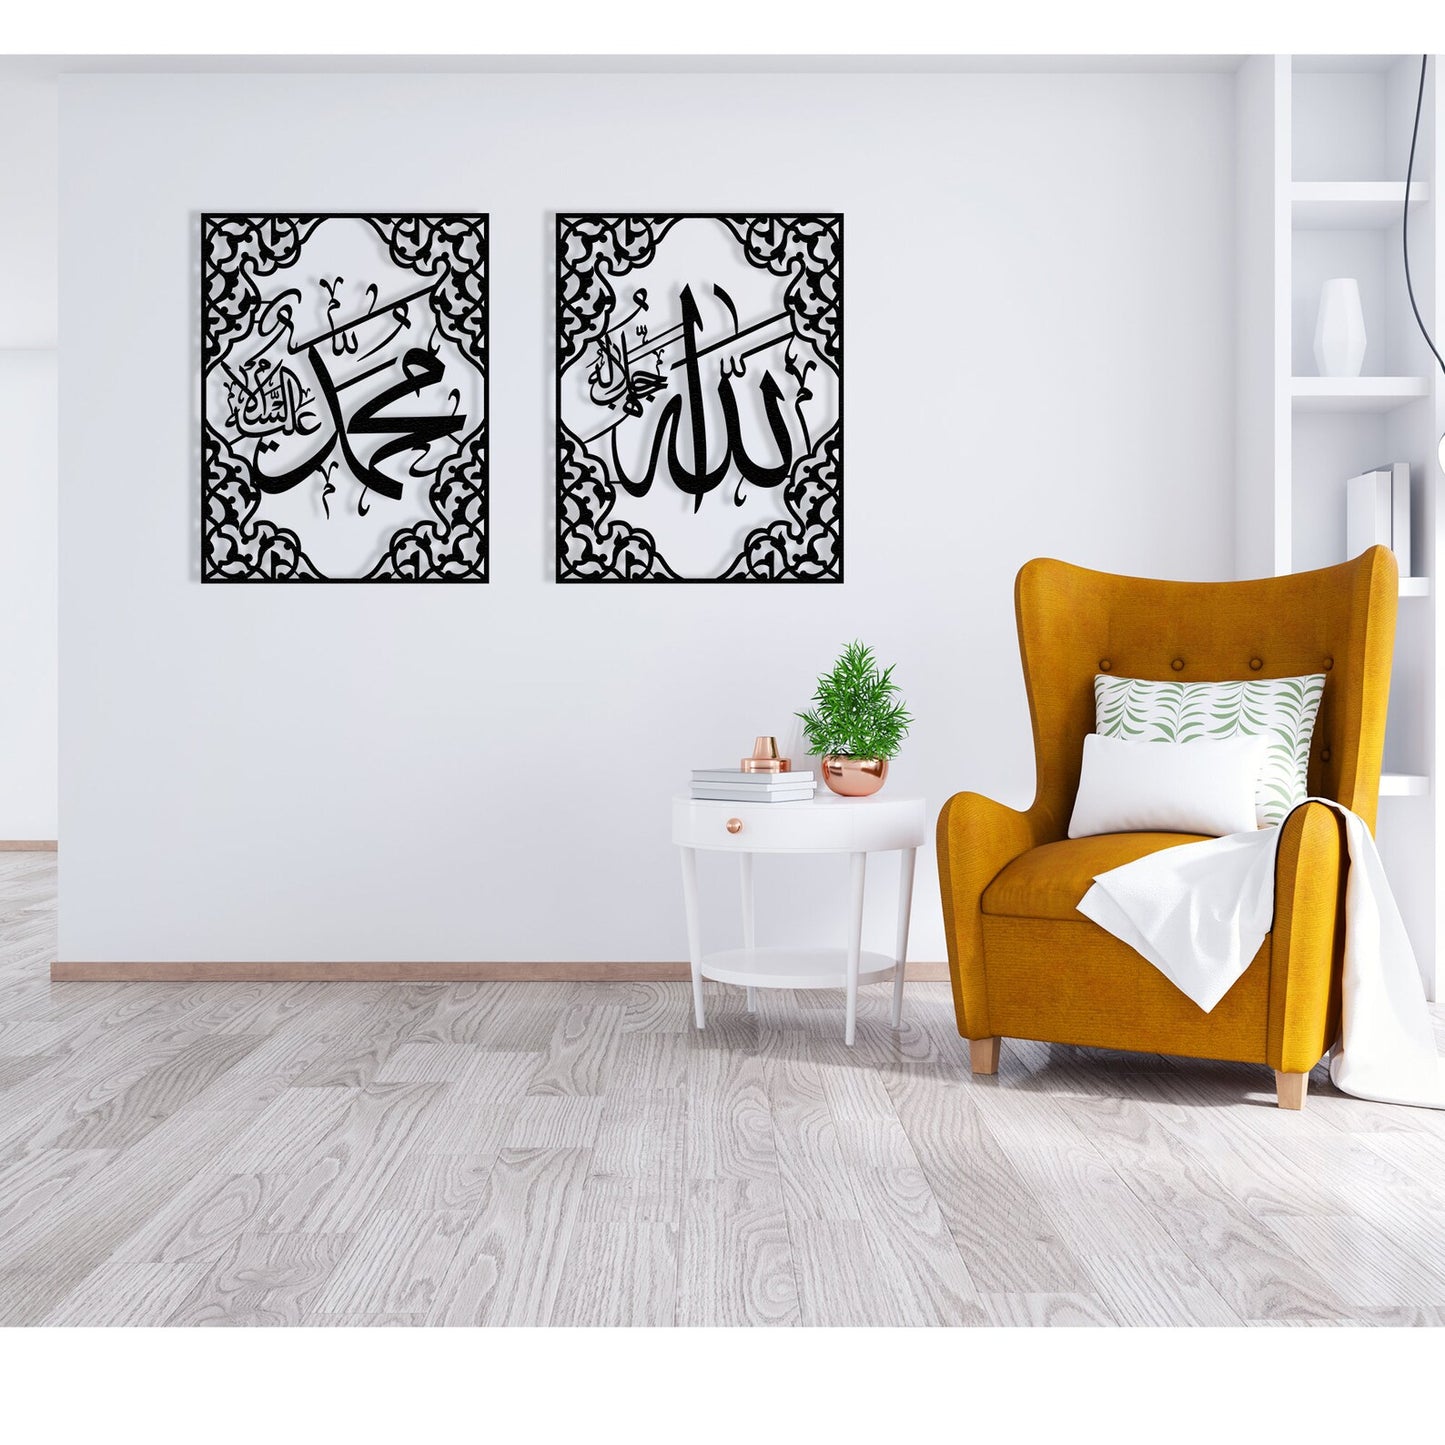 ALLAH (SAW) MUHAMMAD(PBUH) WALL TUGRA FRAME FOR HOME SIZE-12 INCH BY 16 INCH